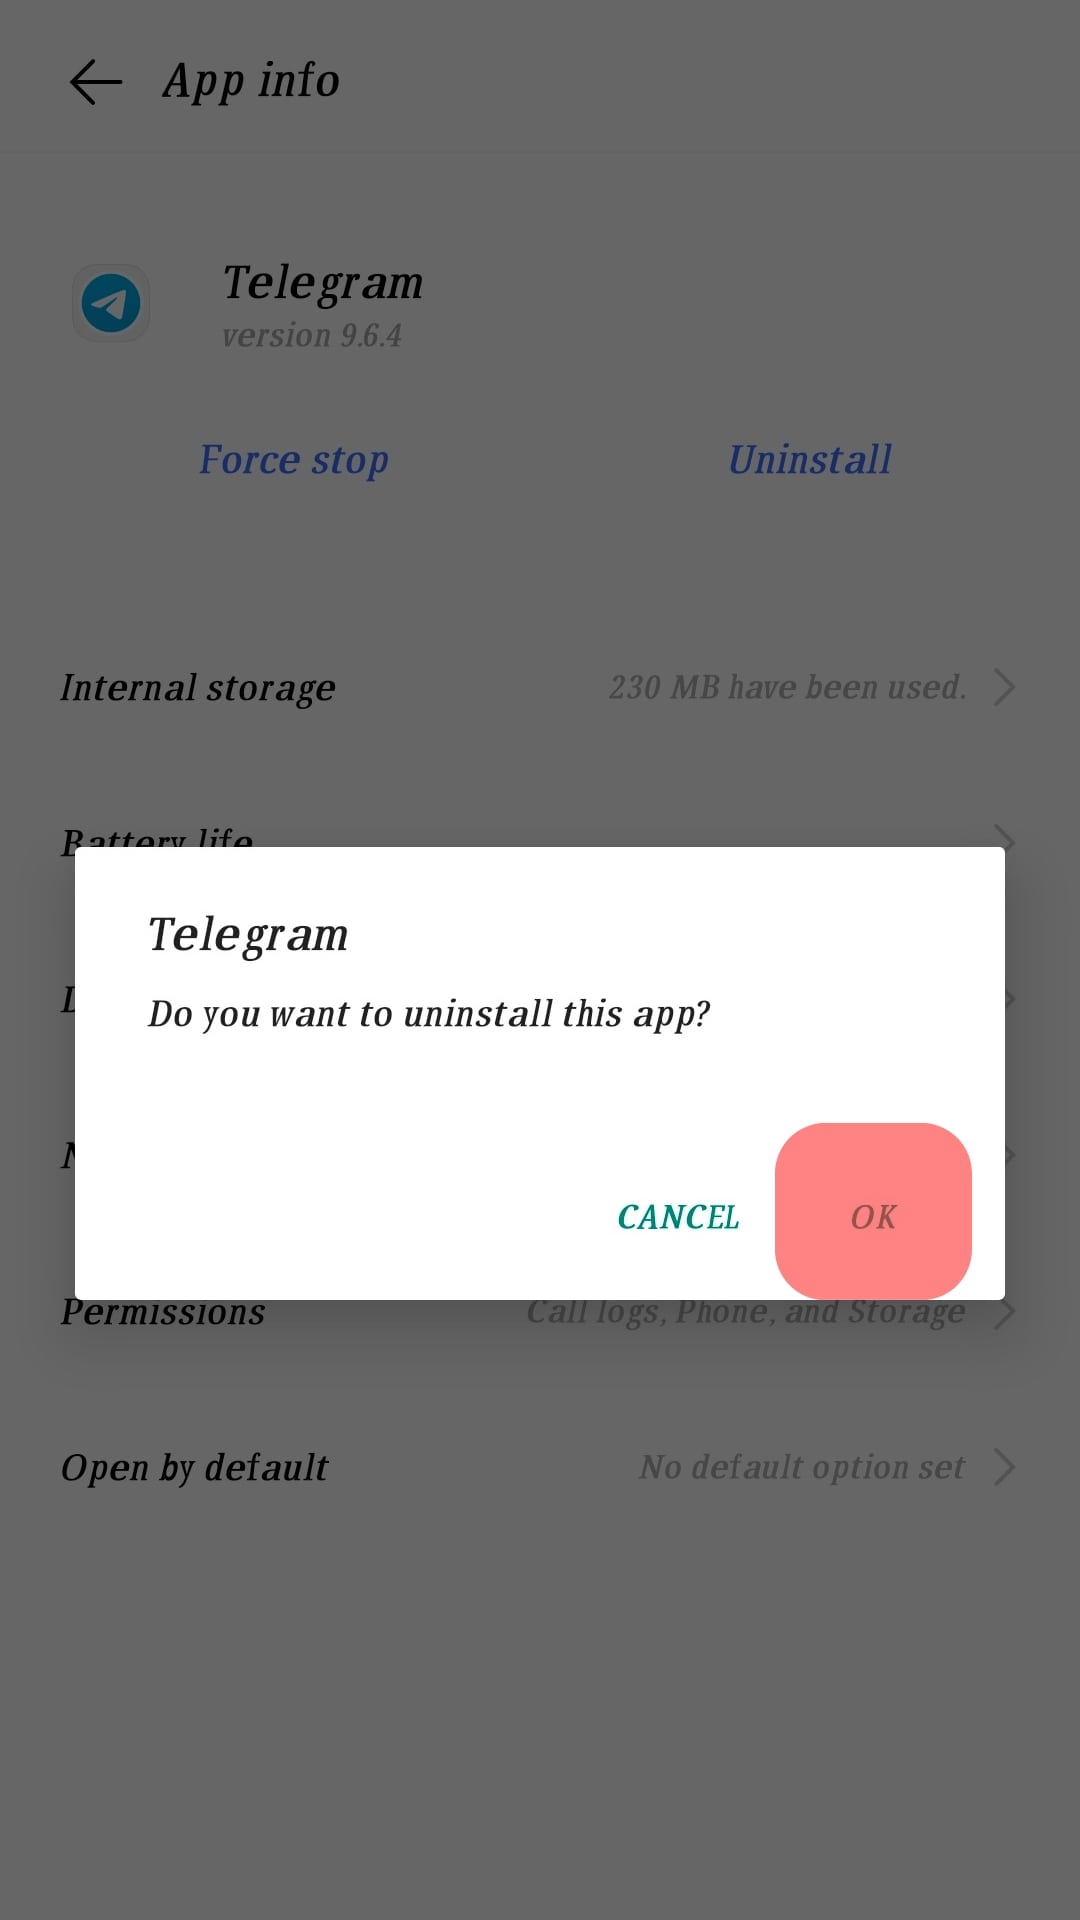 Confirm By Tapping Ok.